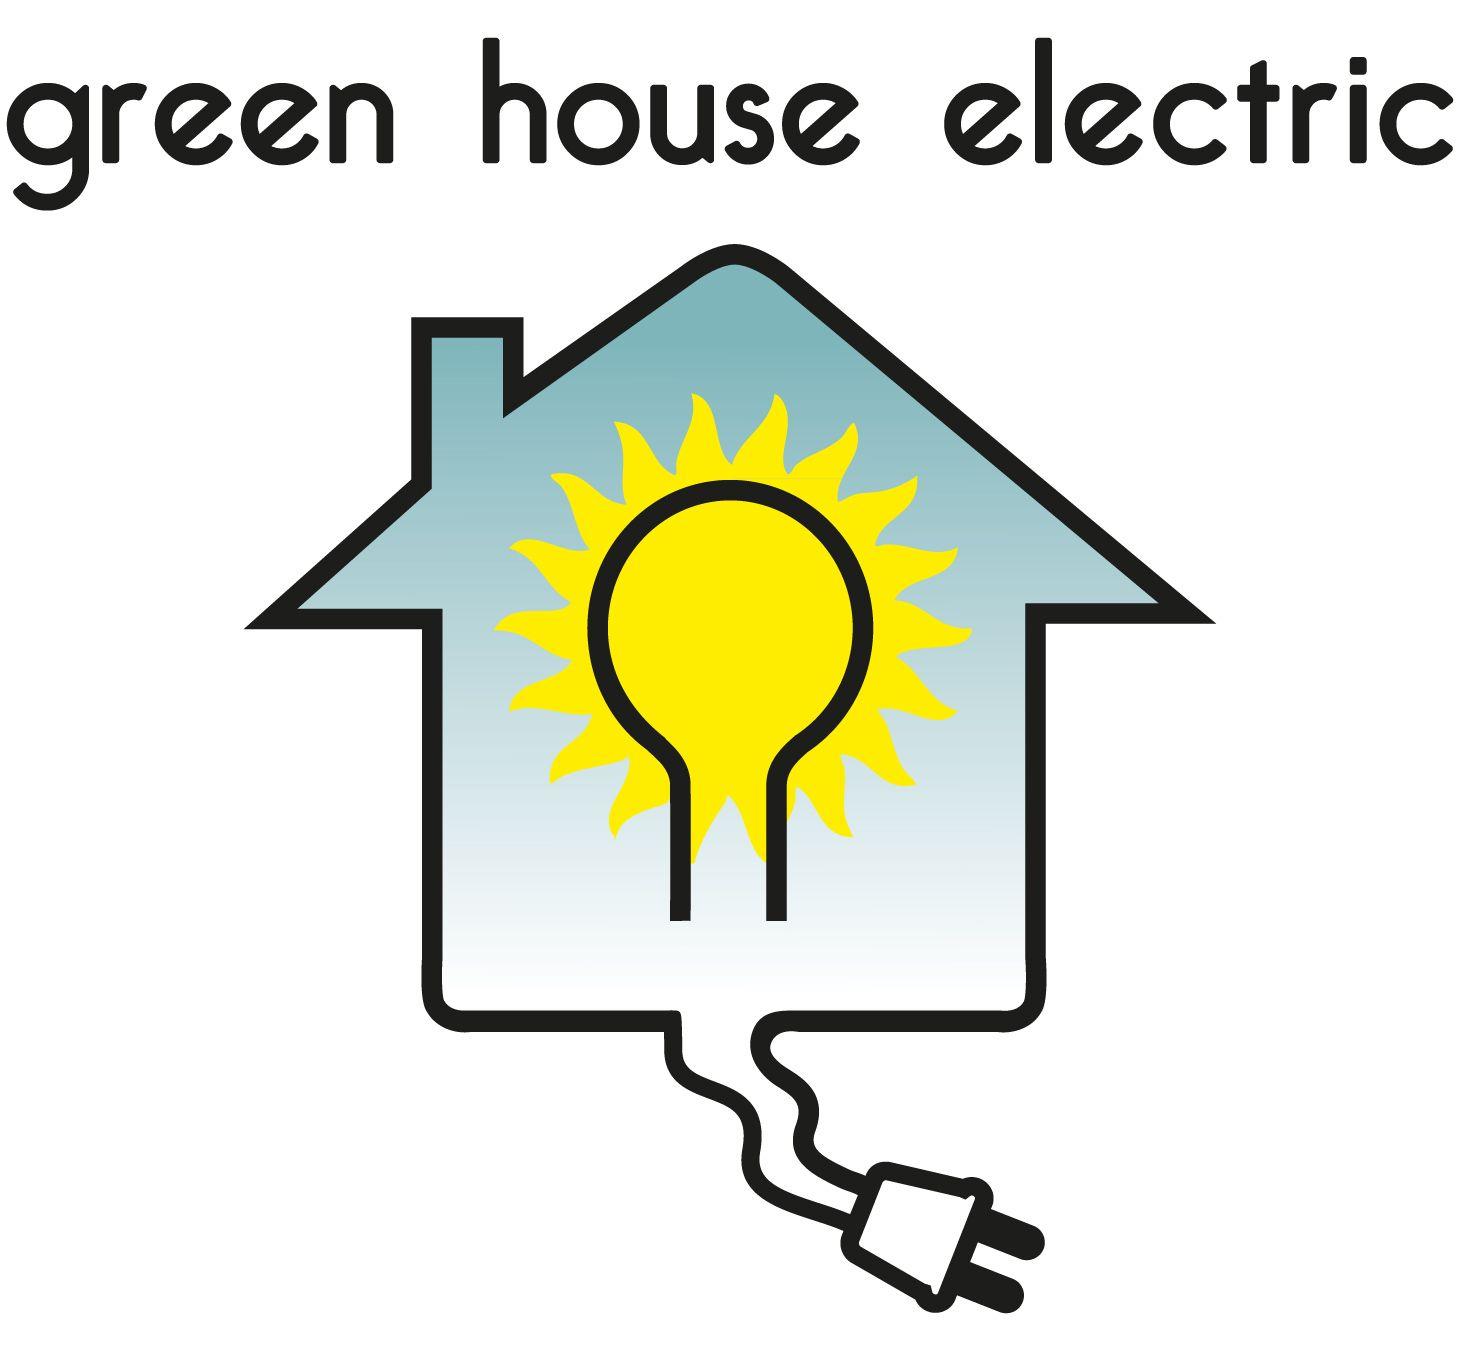 Electric House Logo - Green House Electric - Welcome